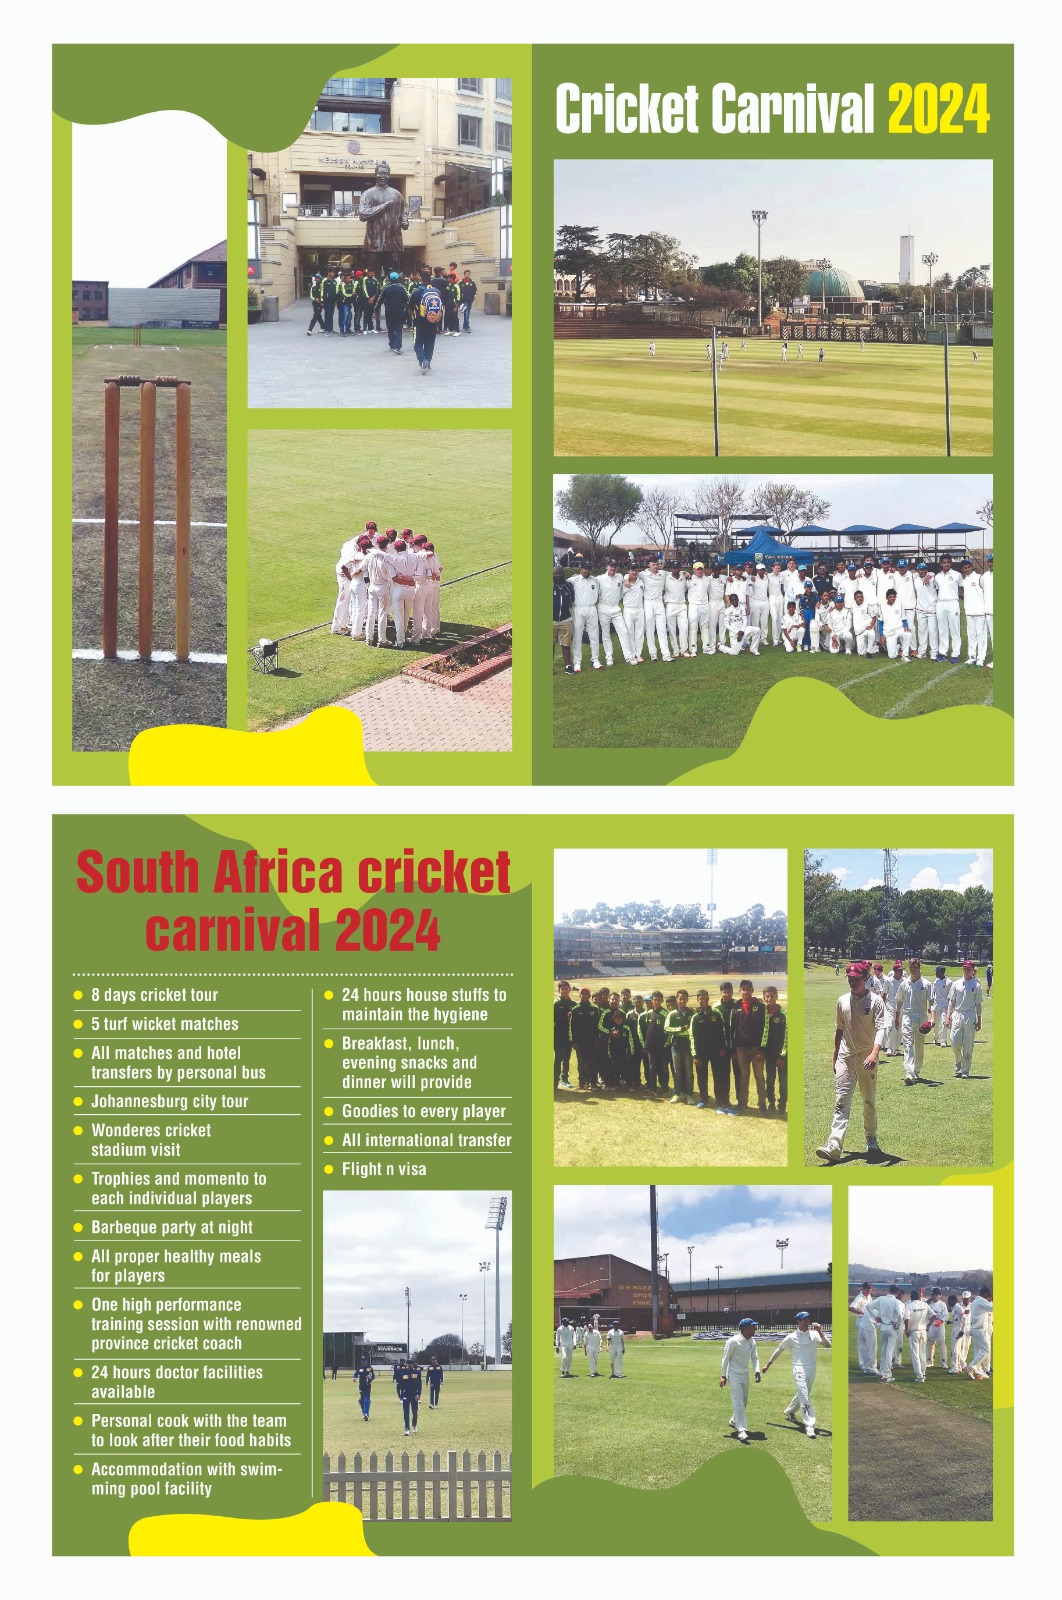 South Africa Cricket Carnival 2024